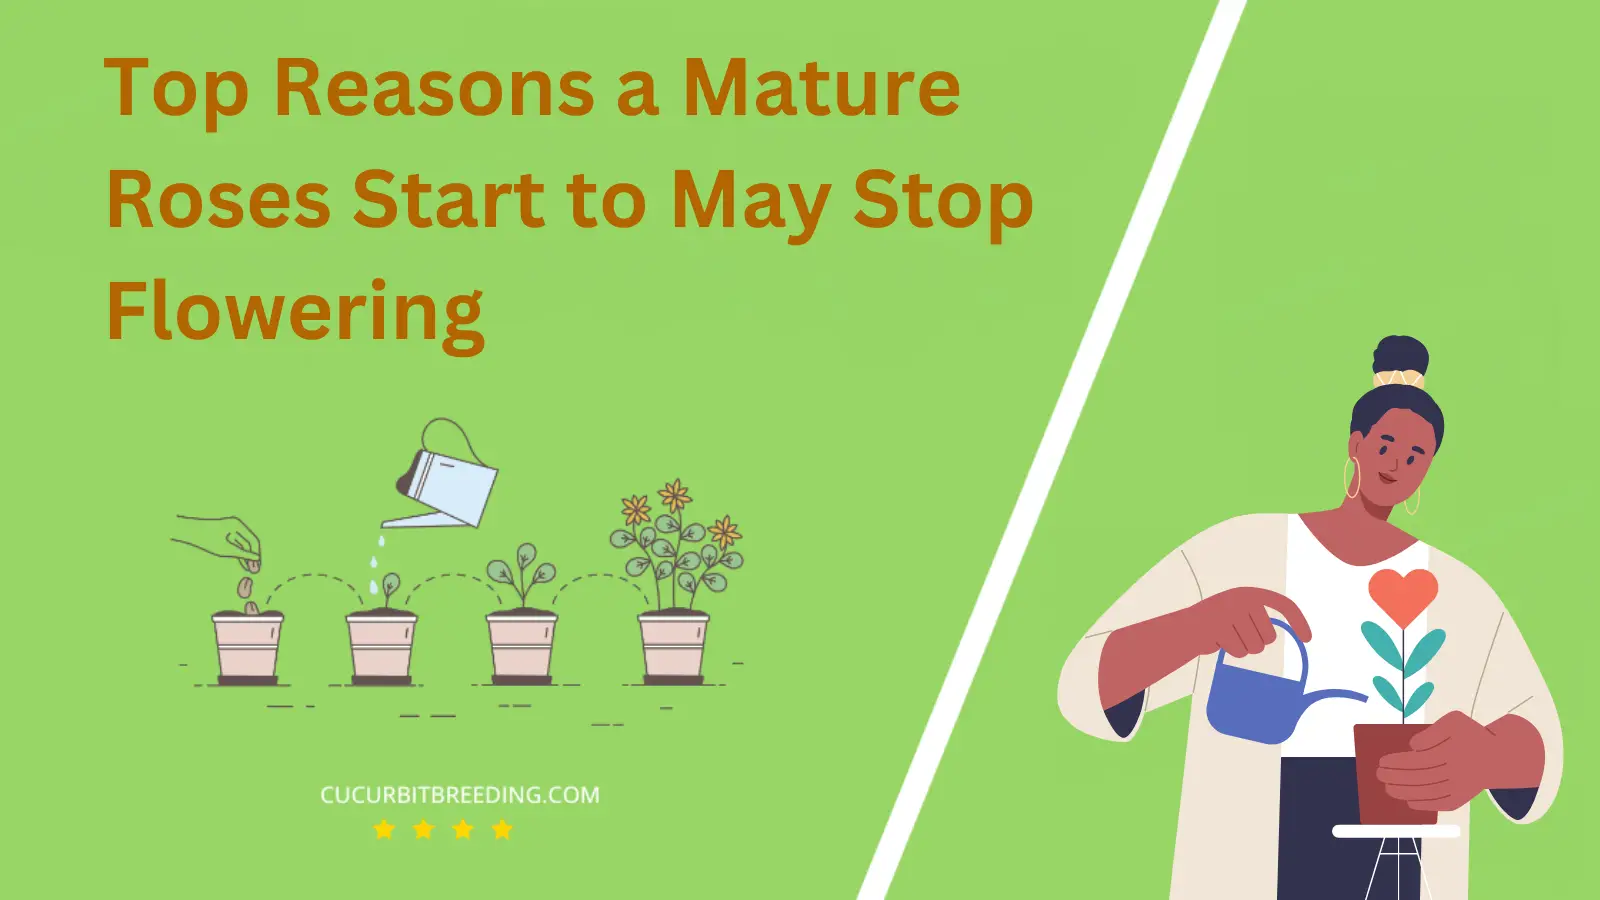 Top Reasons a Mature Roses Start to May Stop Flowering